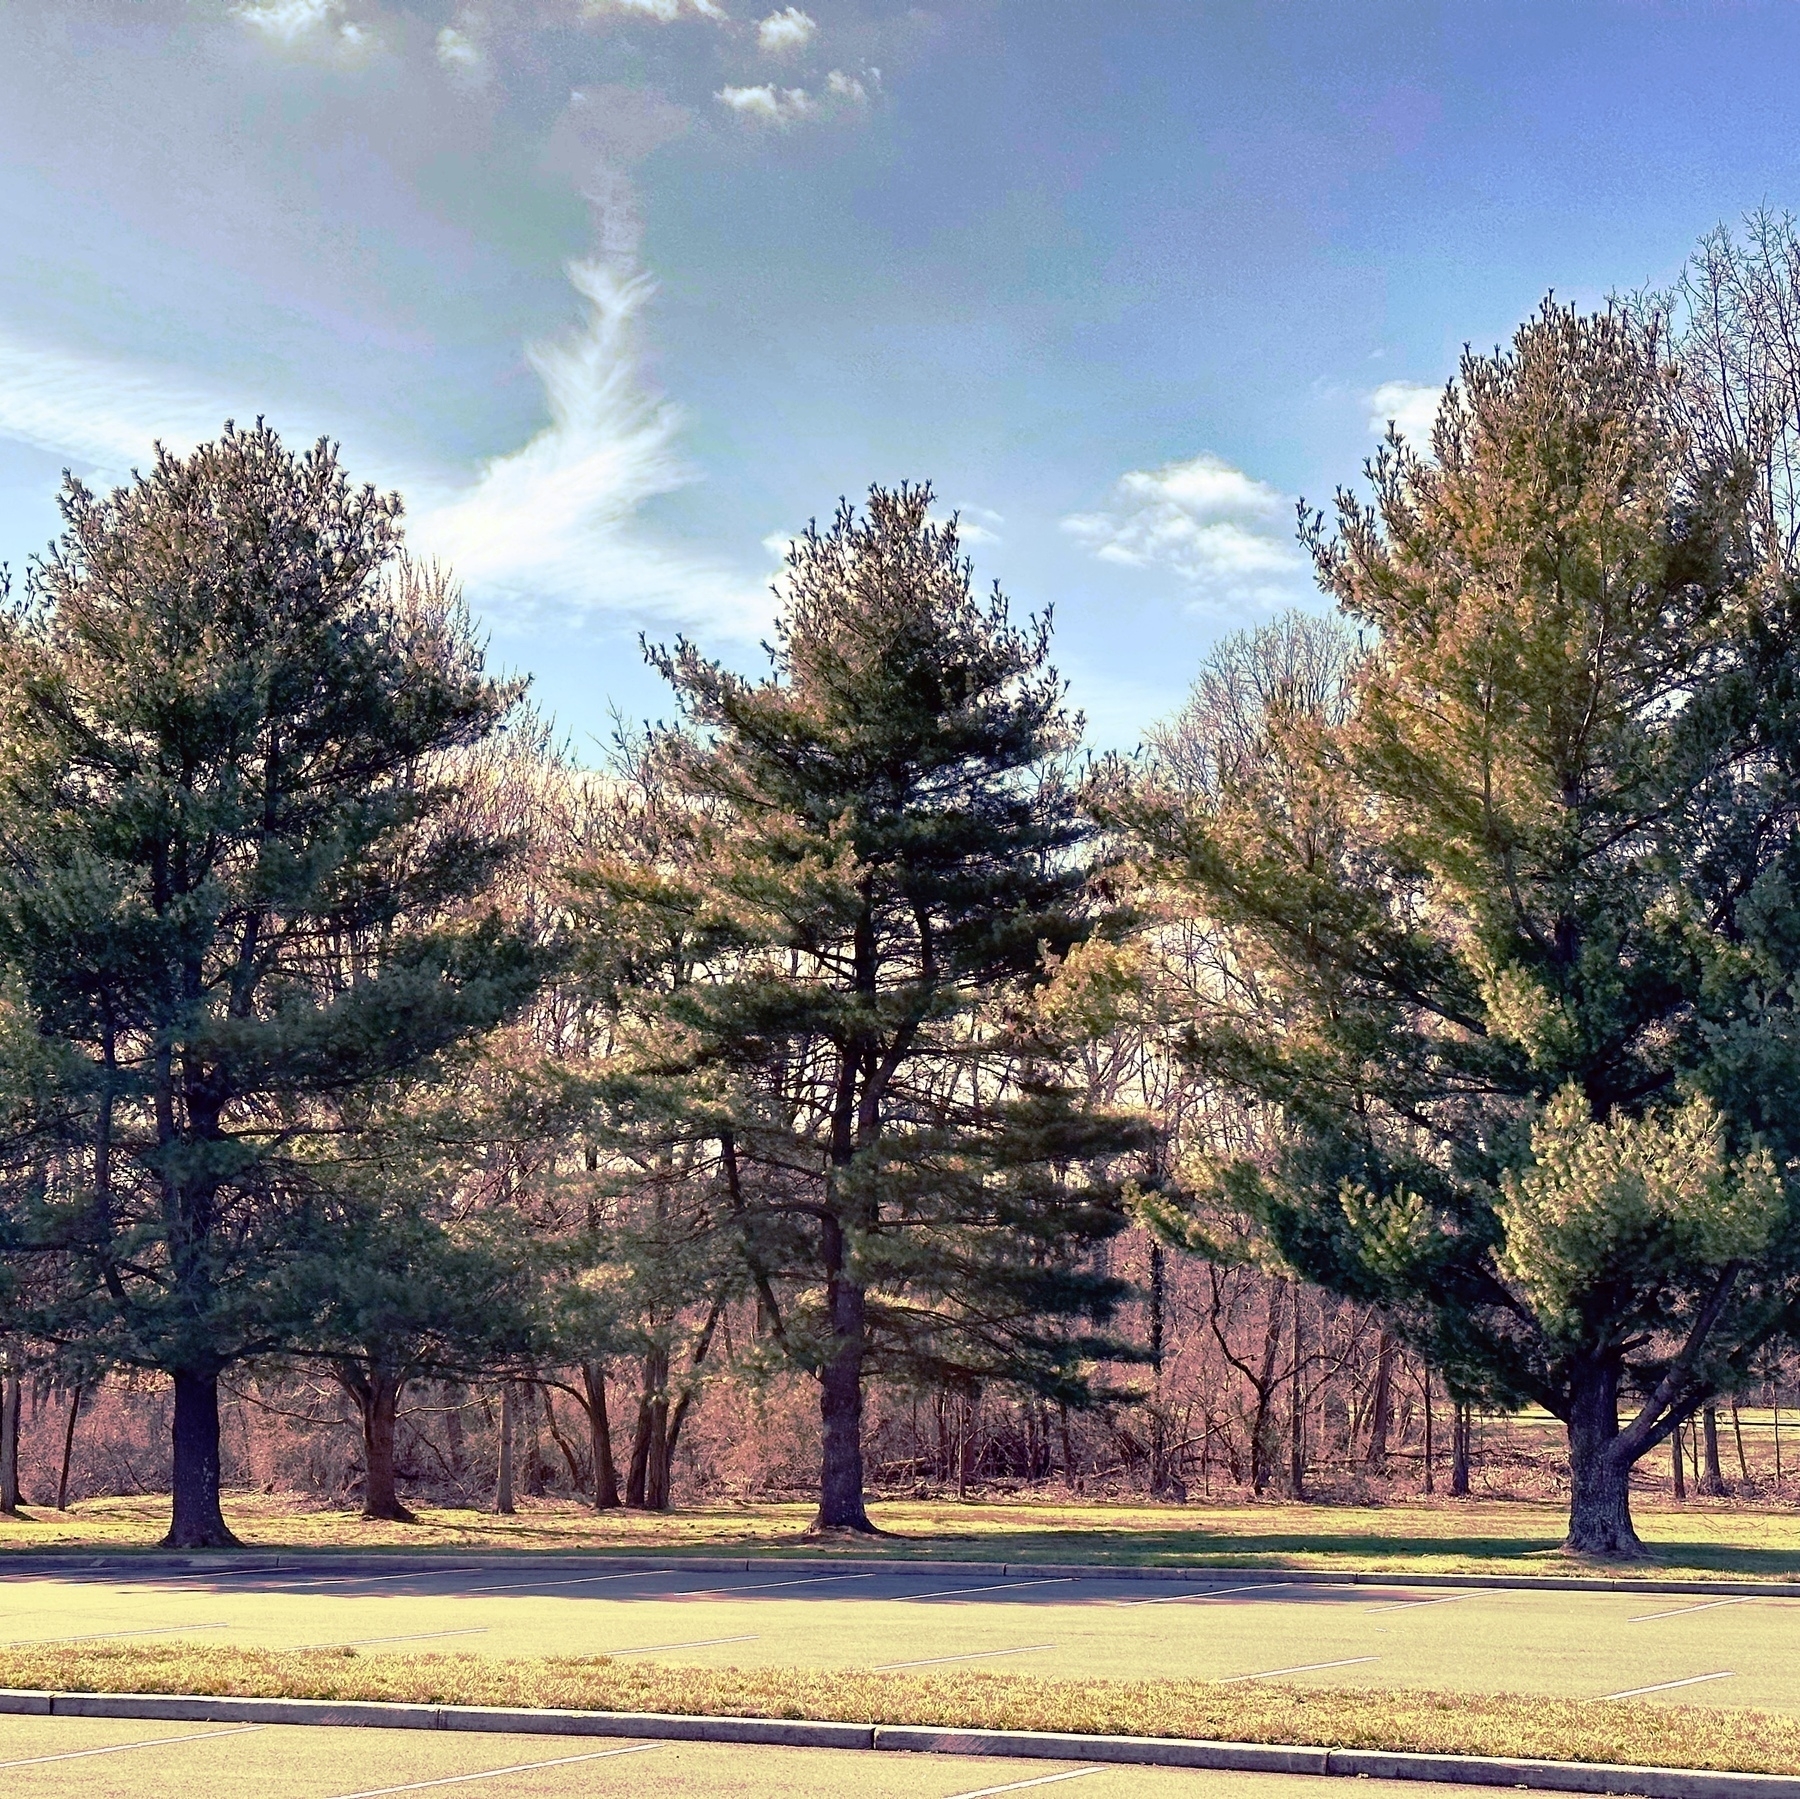 Photo of three evergreen trees and a blue sky with some clouds.